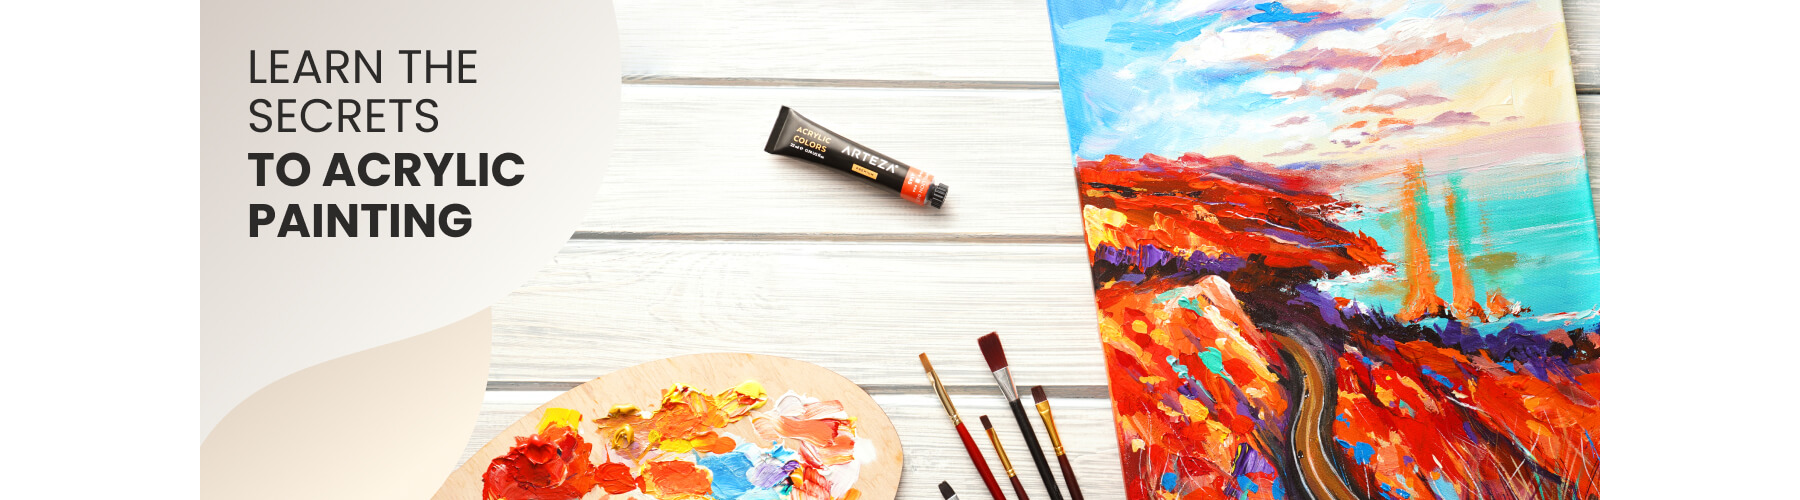 PAINTING ON WOOD - 5 Easy Art Design Ideas with Acrylic Paint 